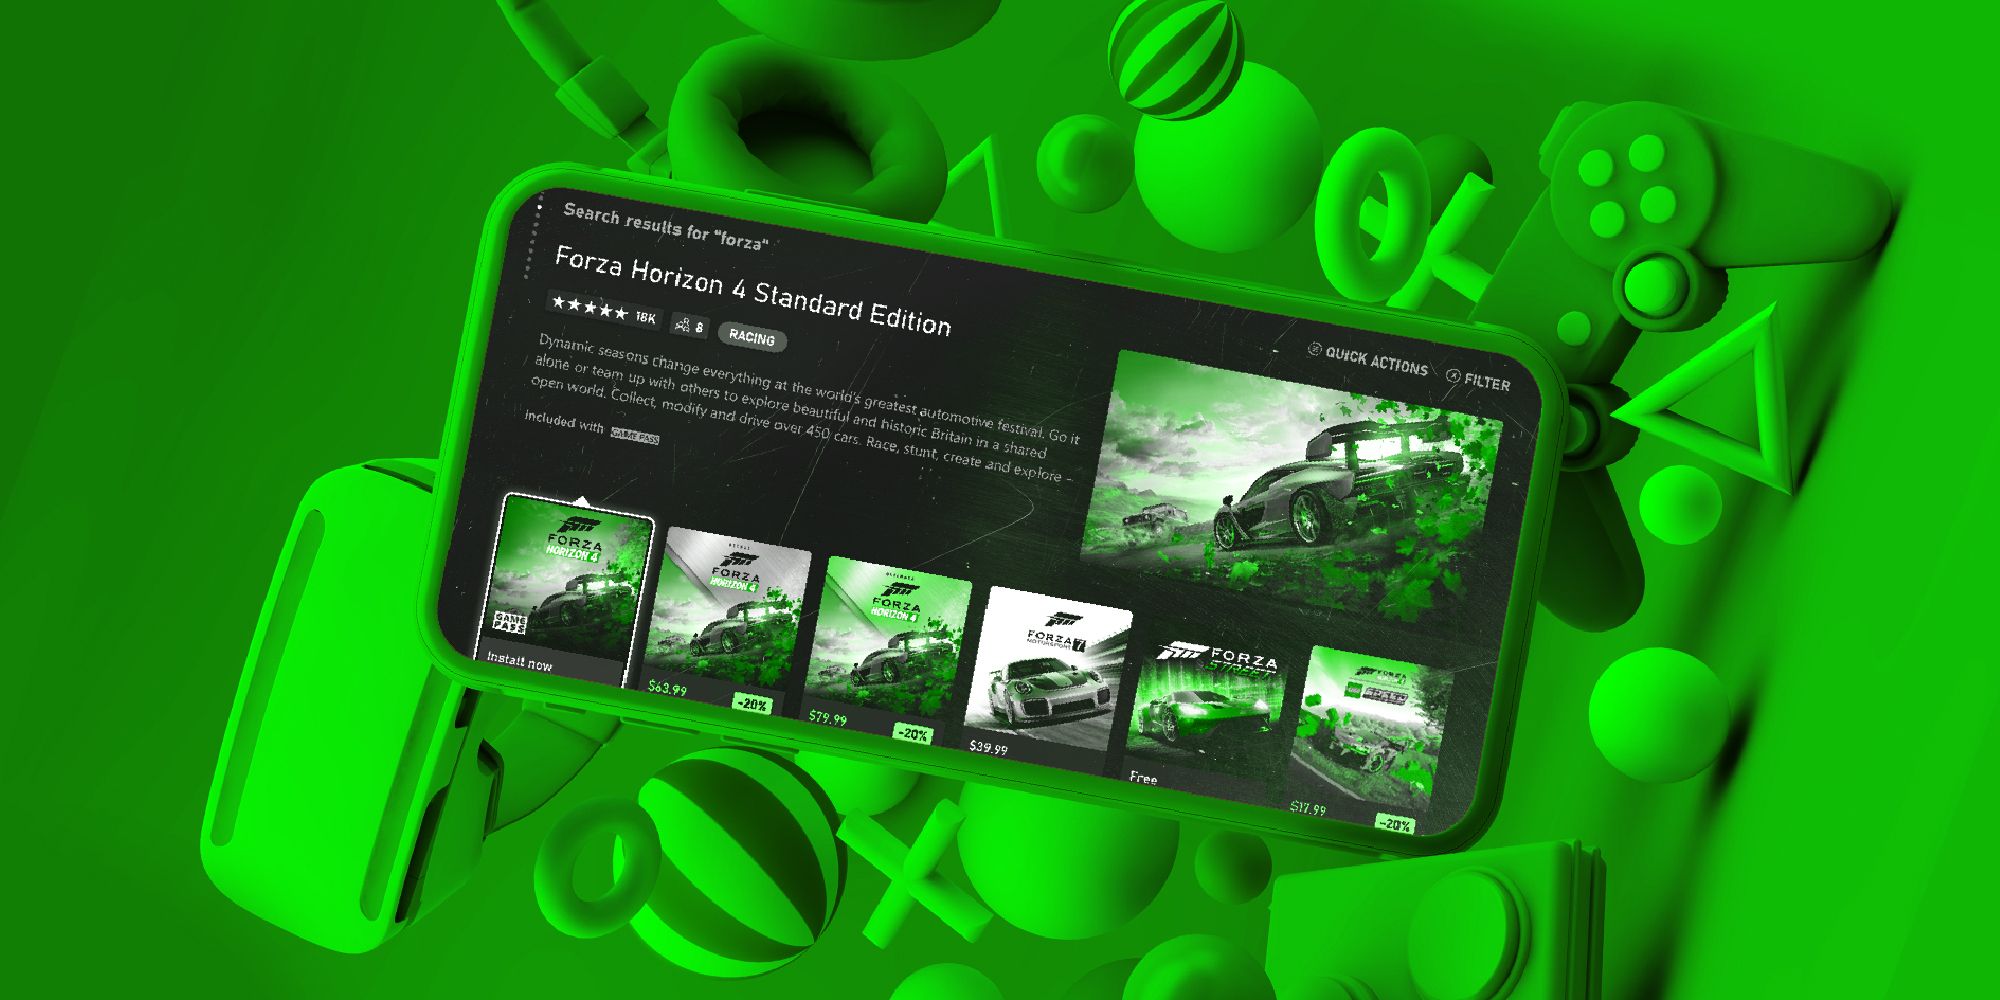 Microsoft Xbox mobile store coming soon- Big challenge for Google